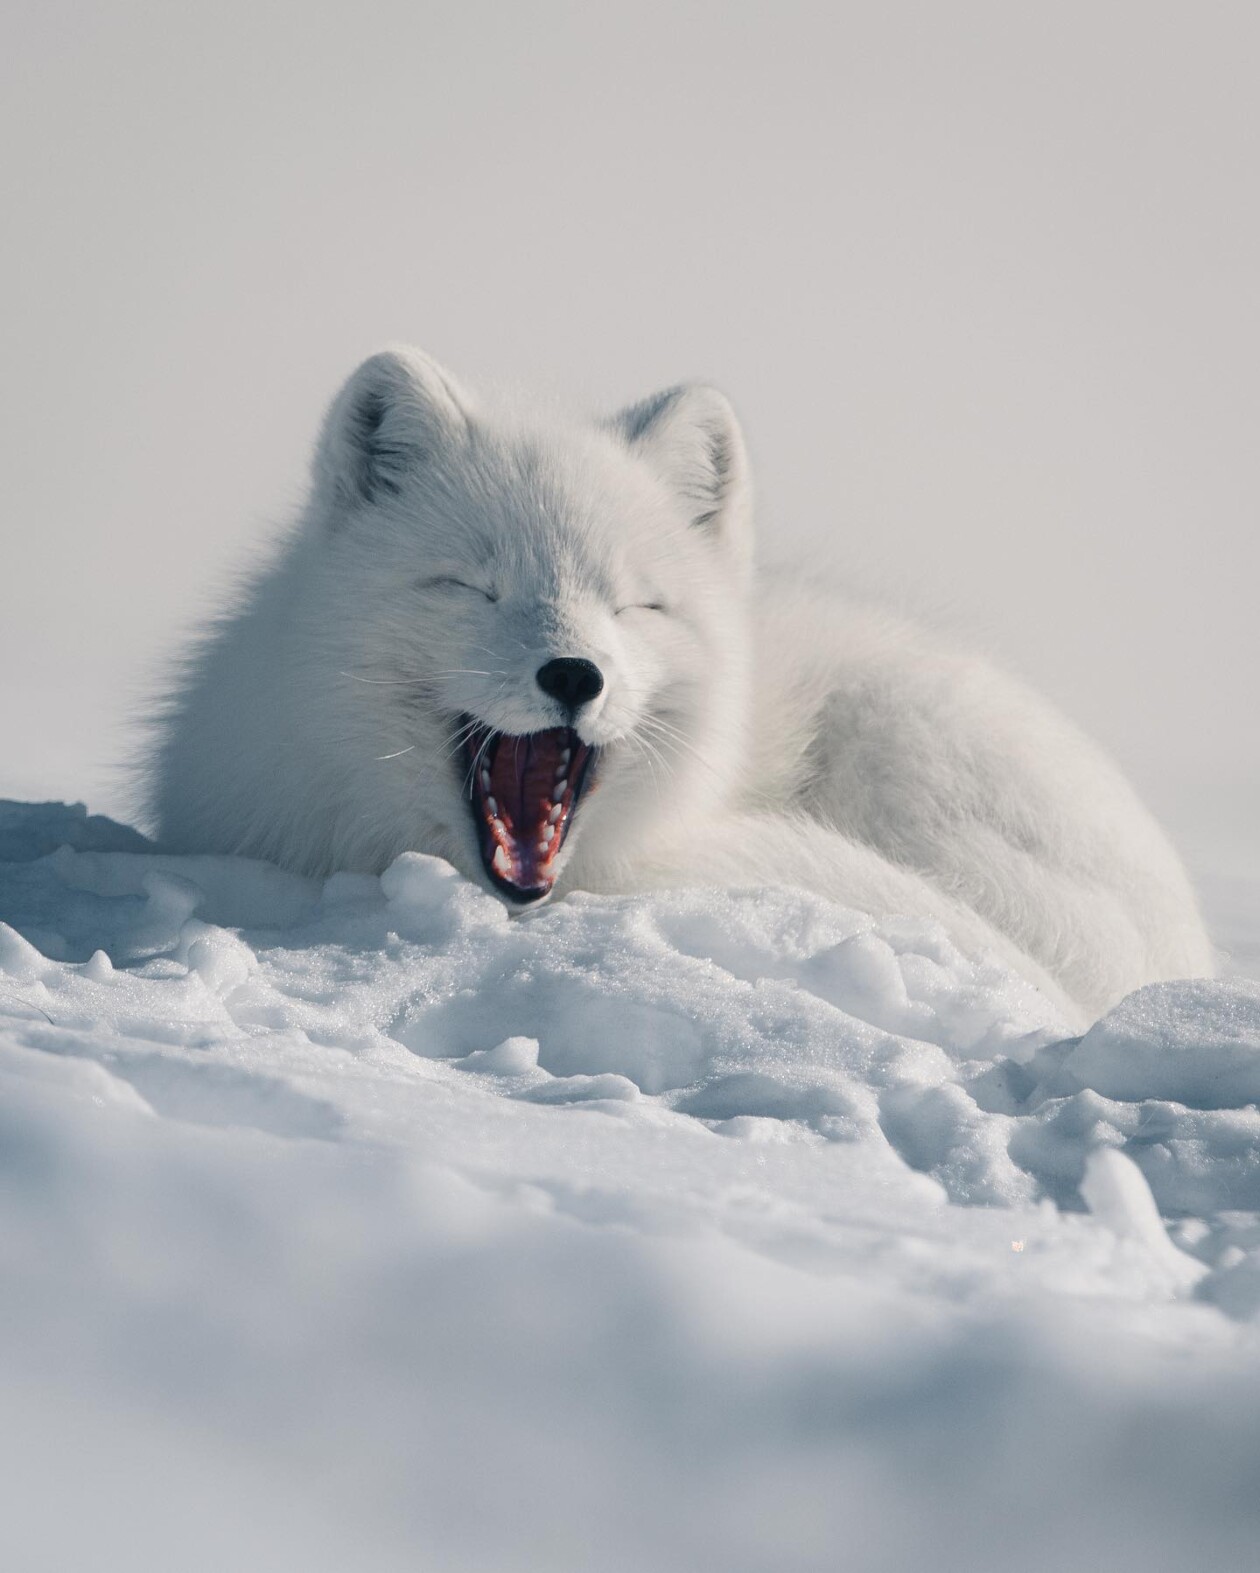 Captivating Pictures Of Arctic Animals By Konsta Punkka (13)